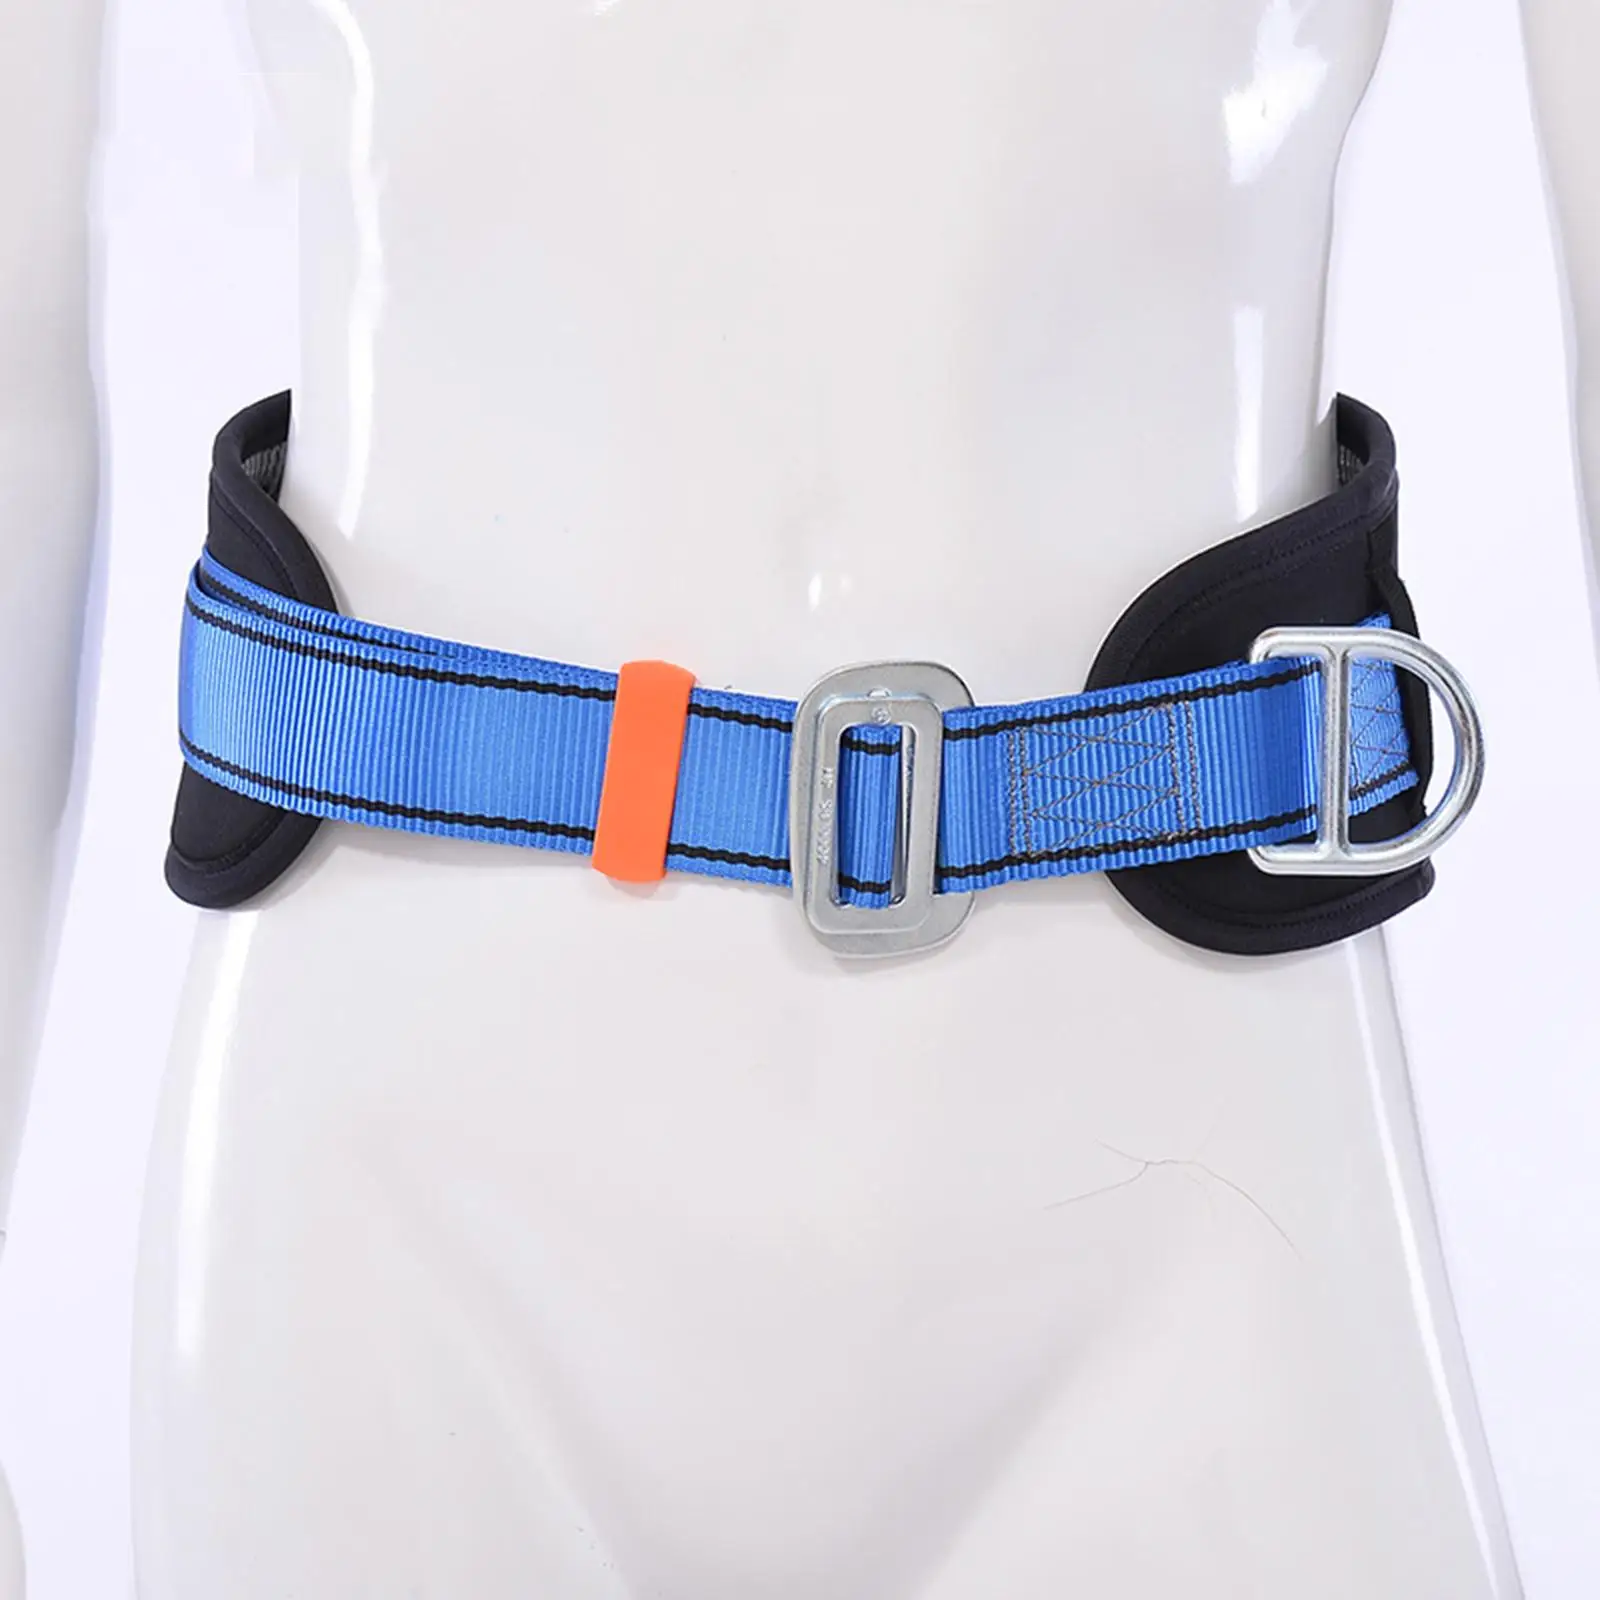 1Pcs Safety Harness Belt Equipment Anti Falling Waist Support Single Hanging Point for Mountaineering High Altitude Work 